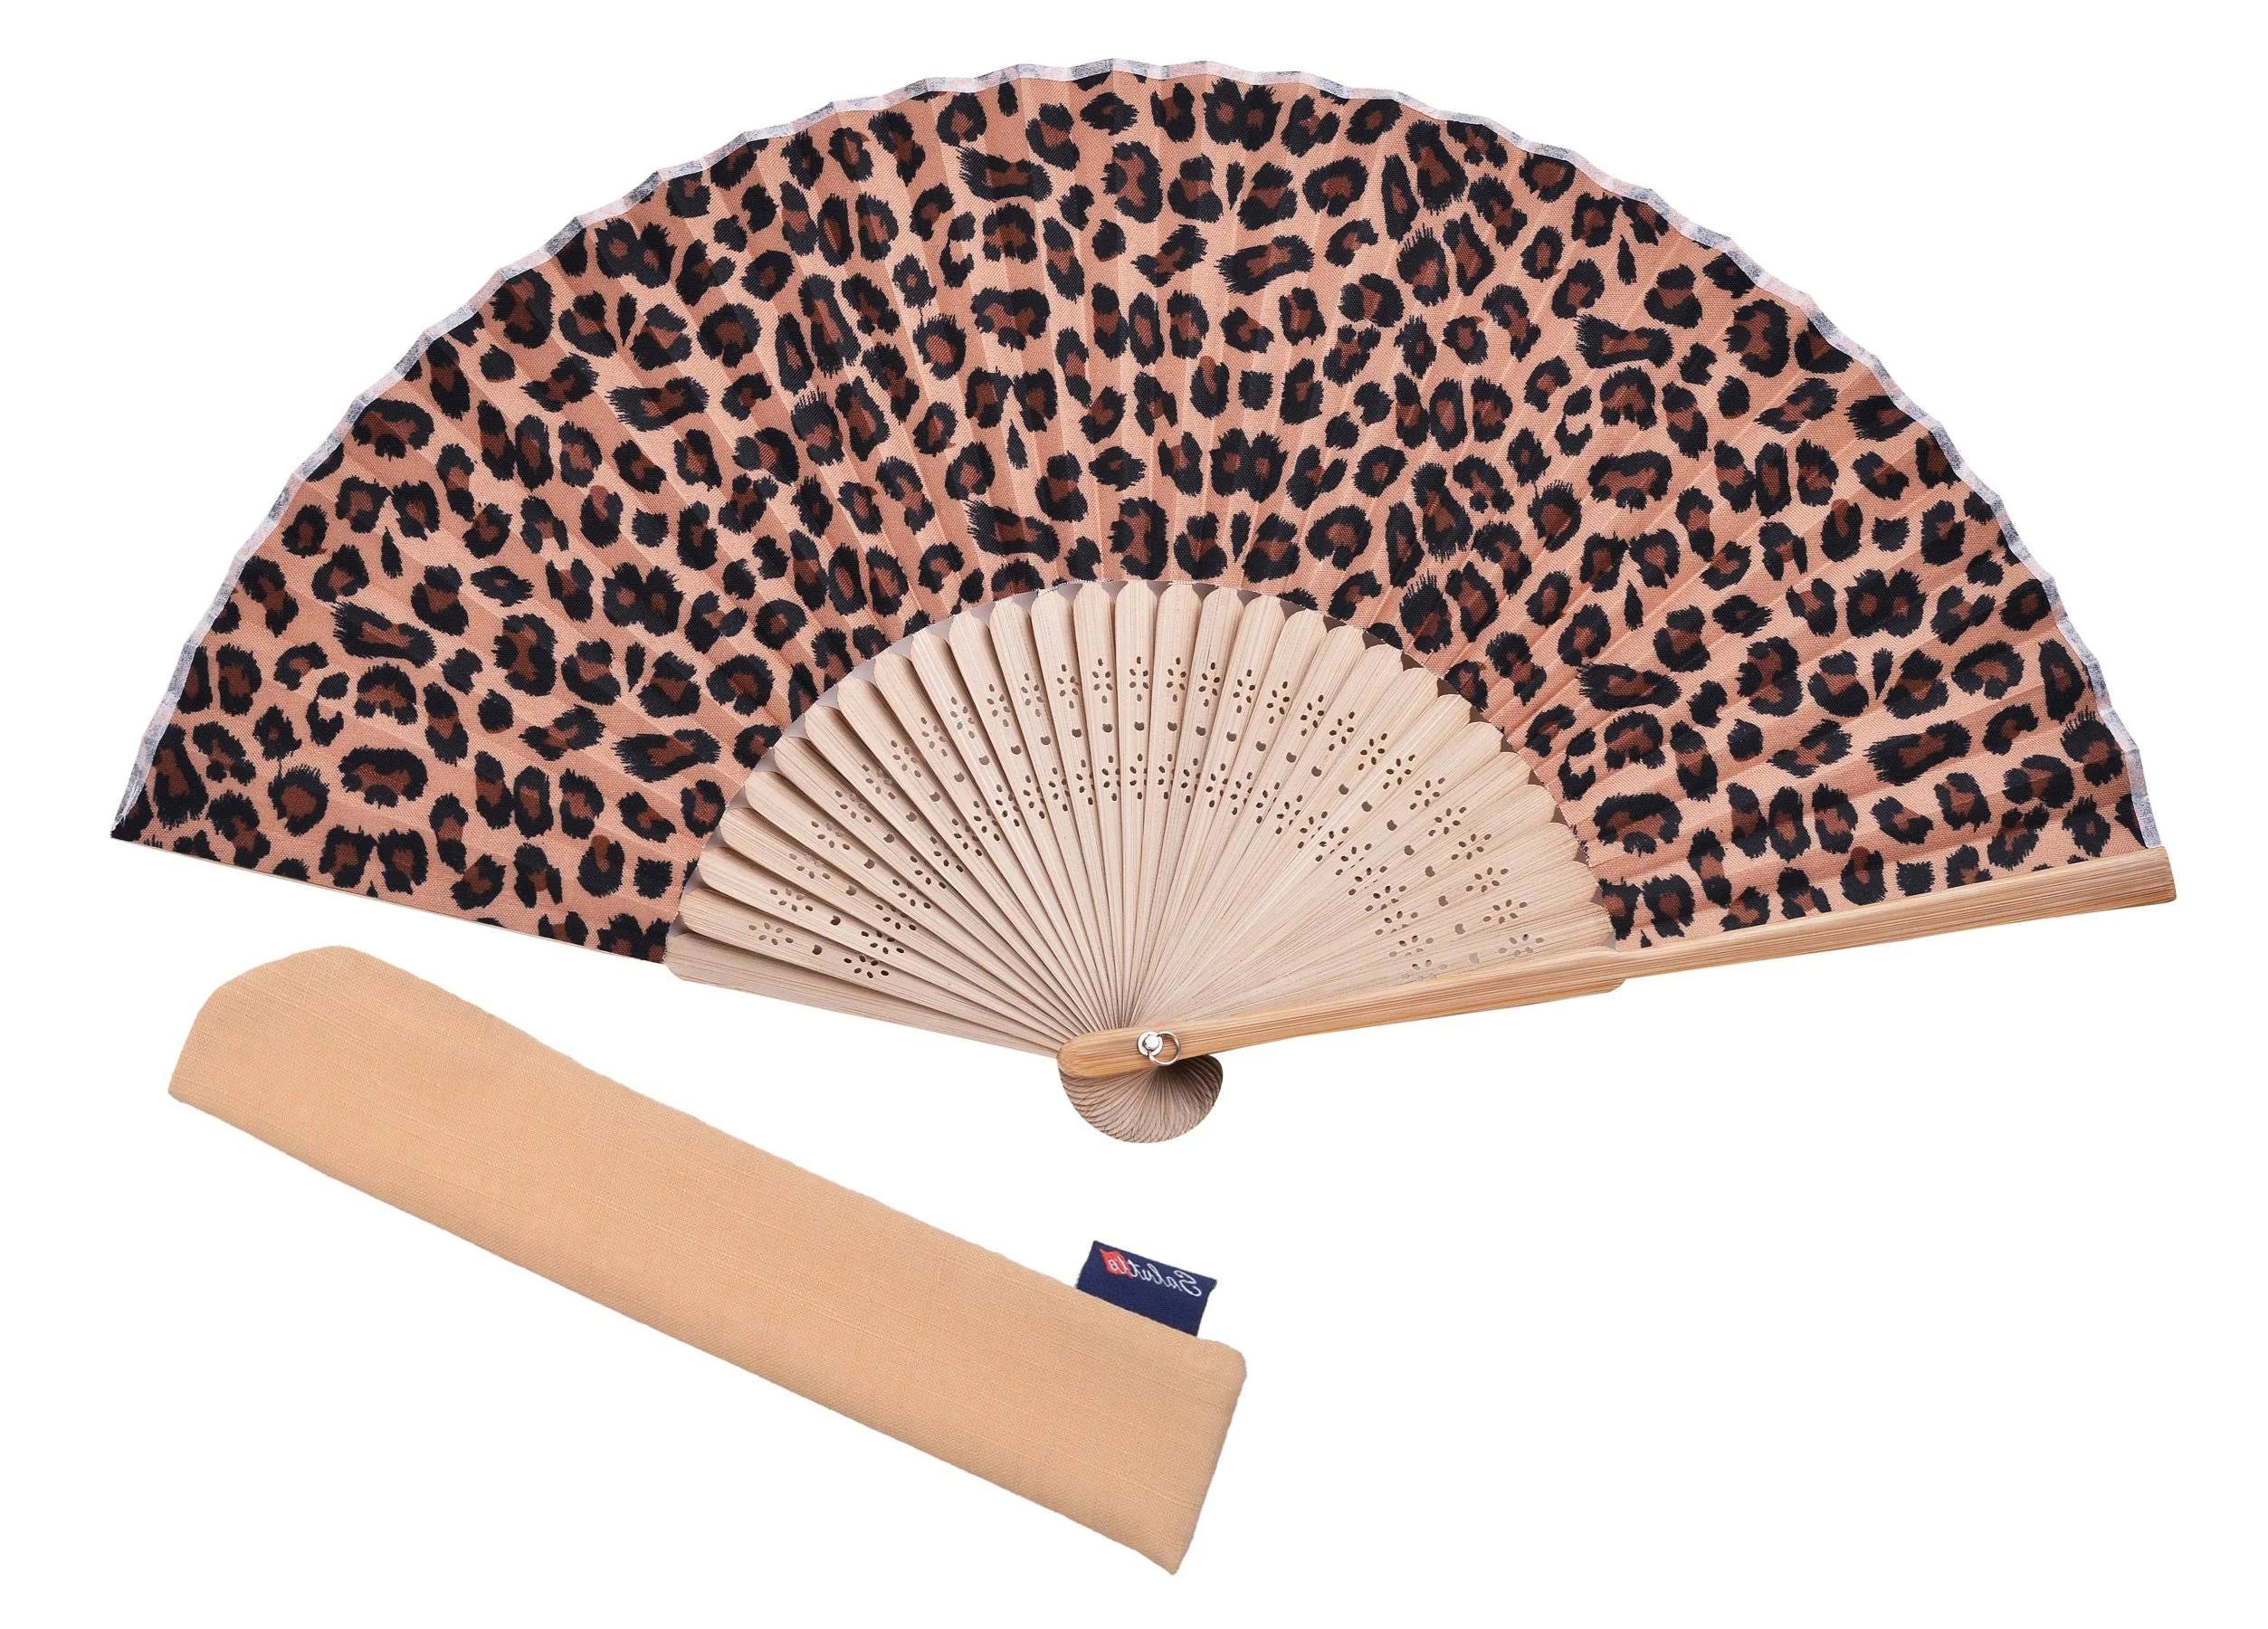 Stylish Bamboo Leopard Printed Hand Held Fan for Parties & Weddings | Image